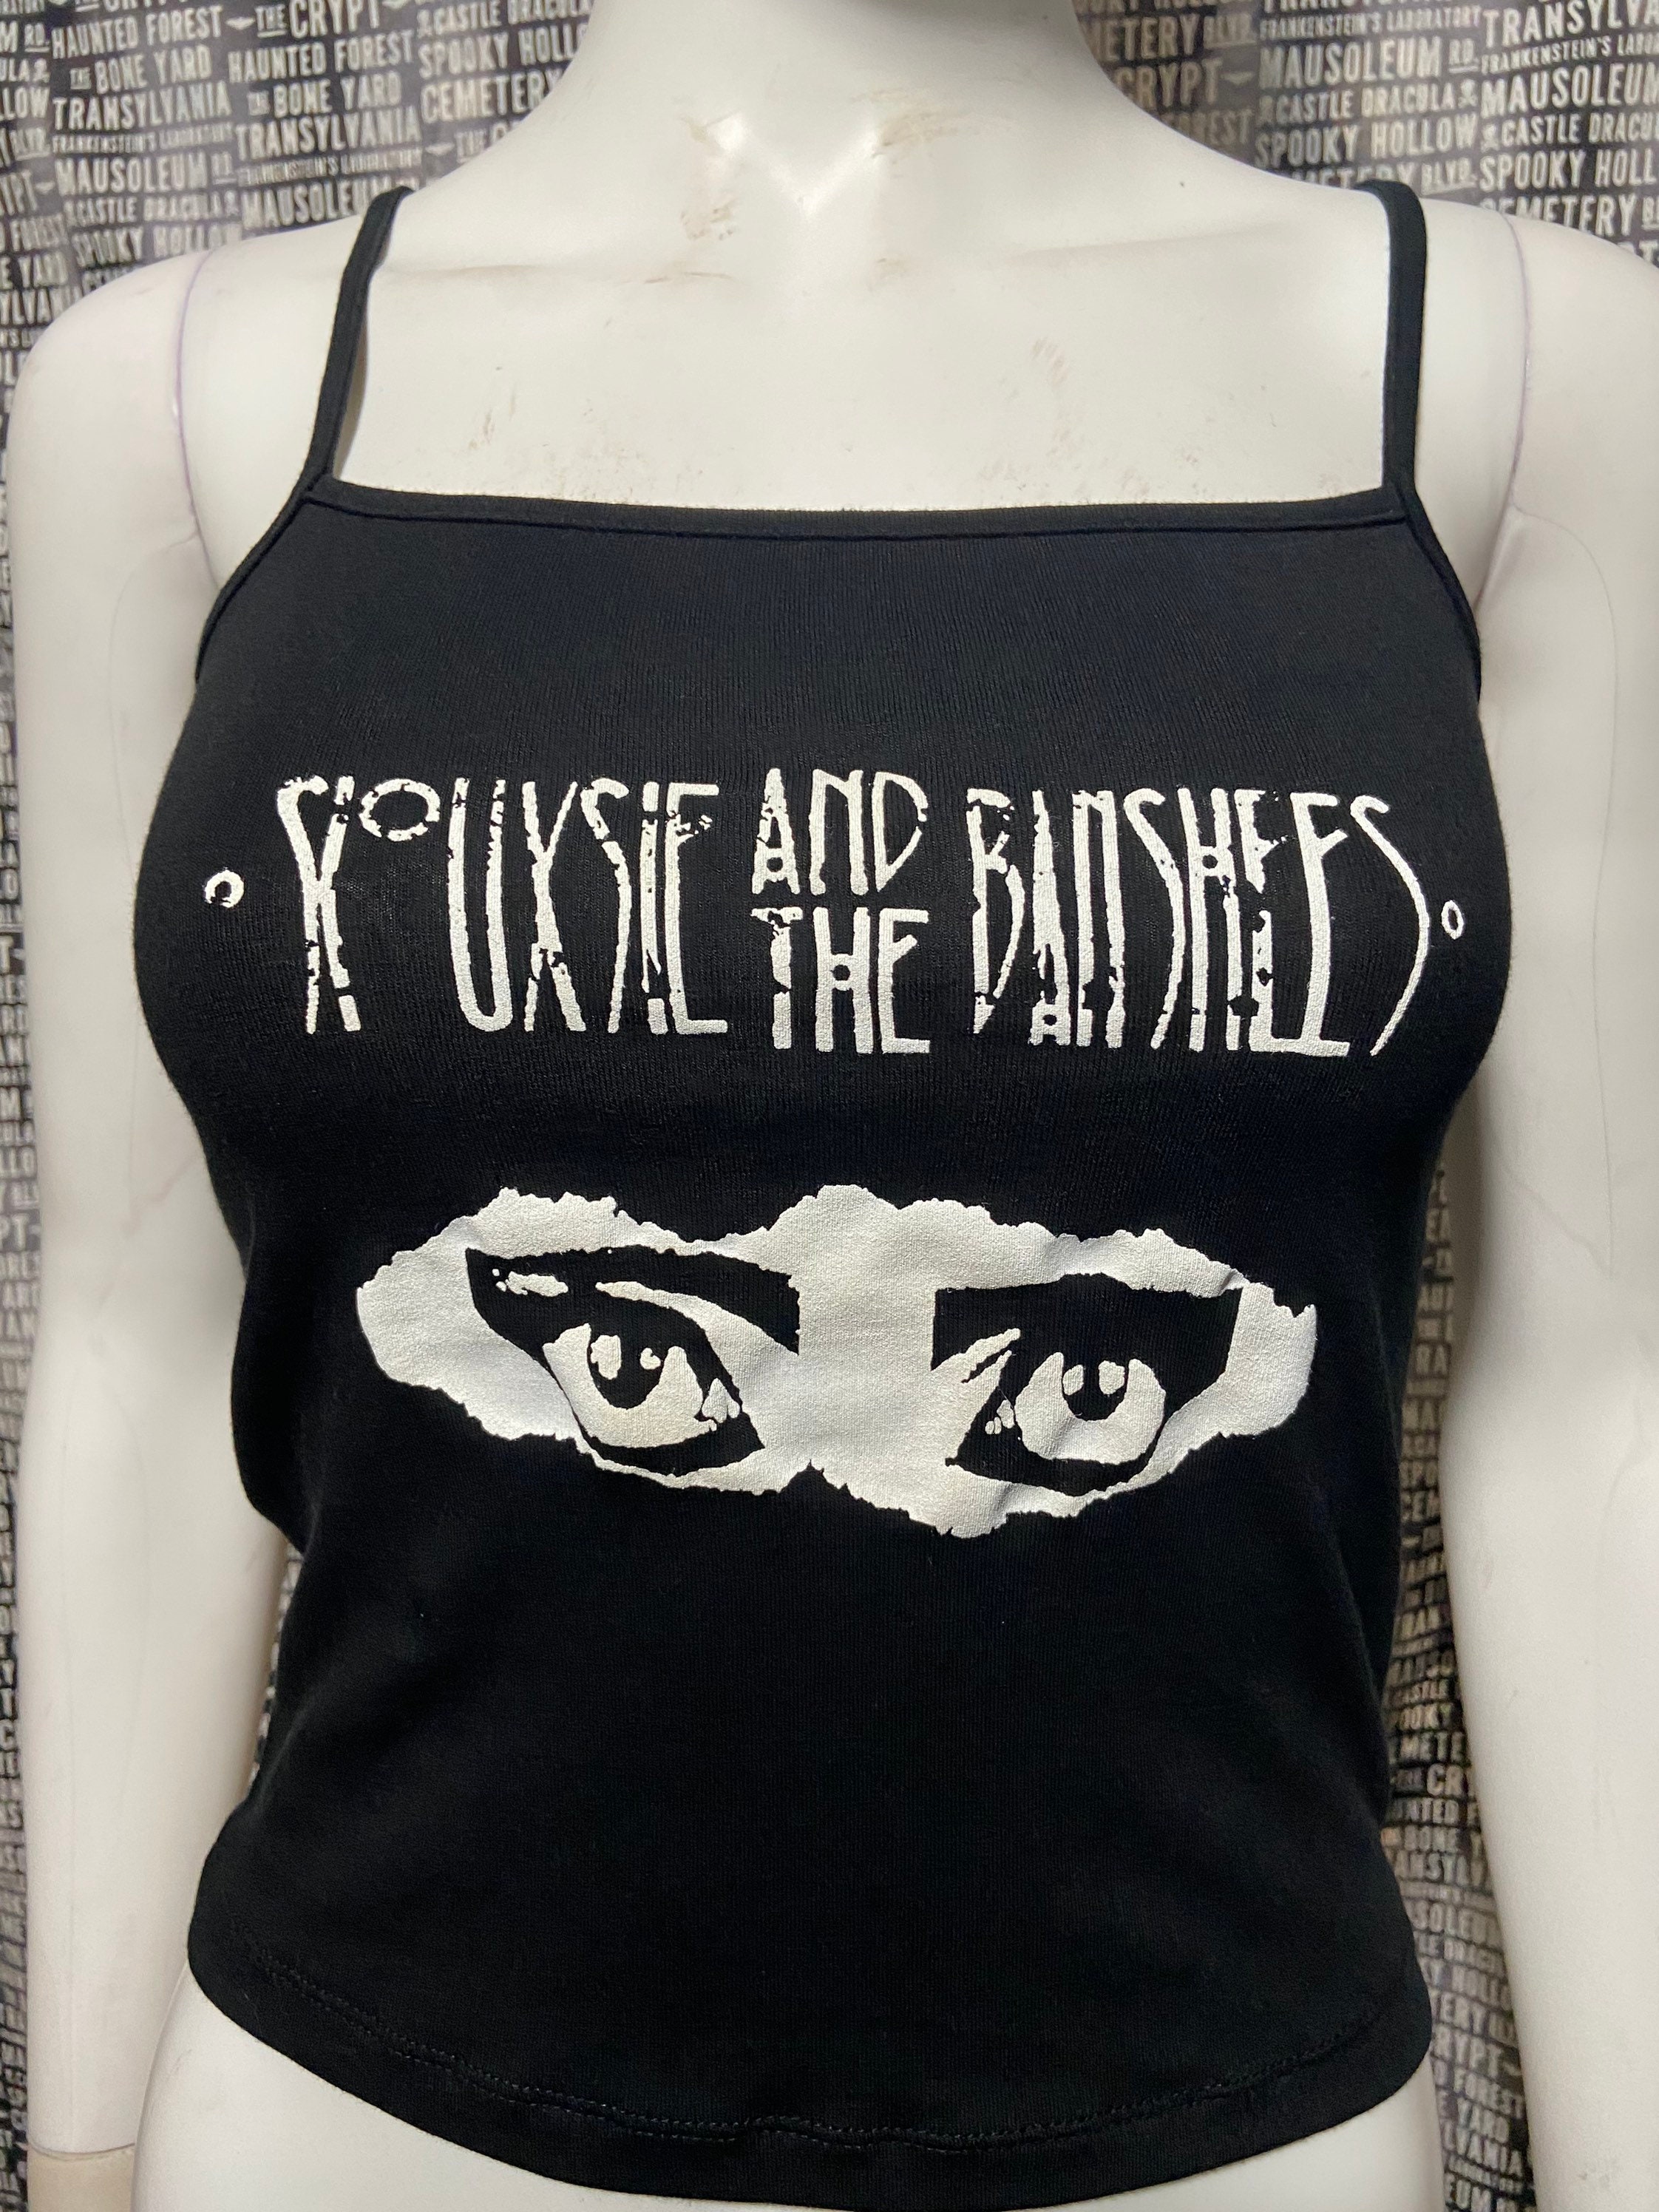 Siouxsie and the Banshees black crop tank top goth gothic | Etsy